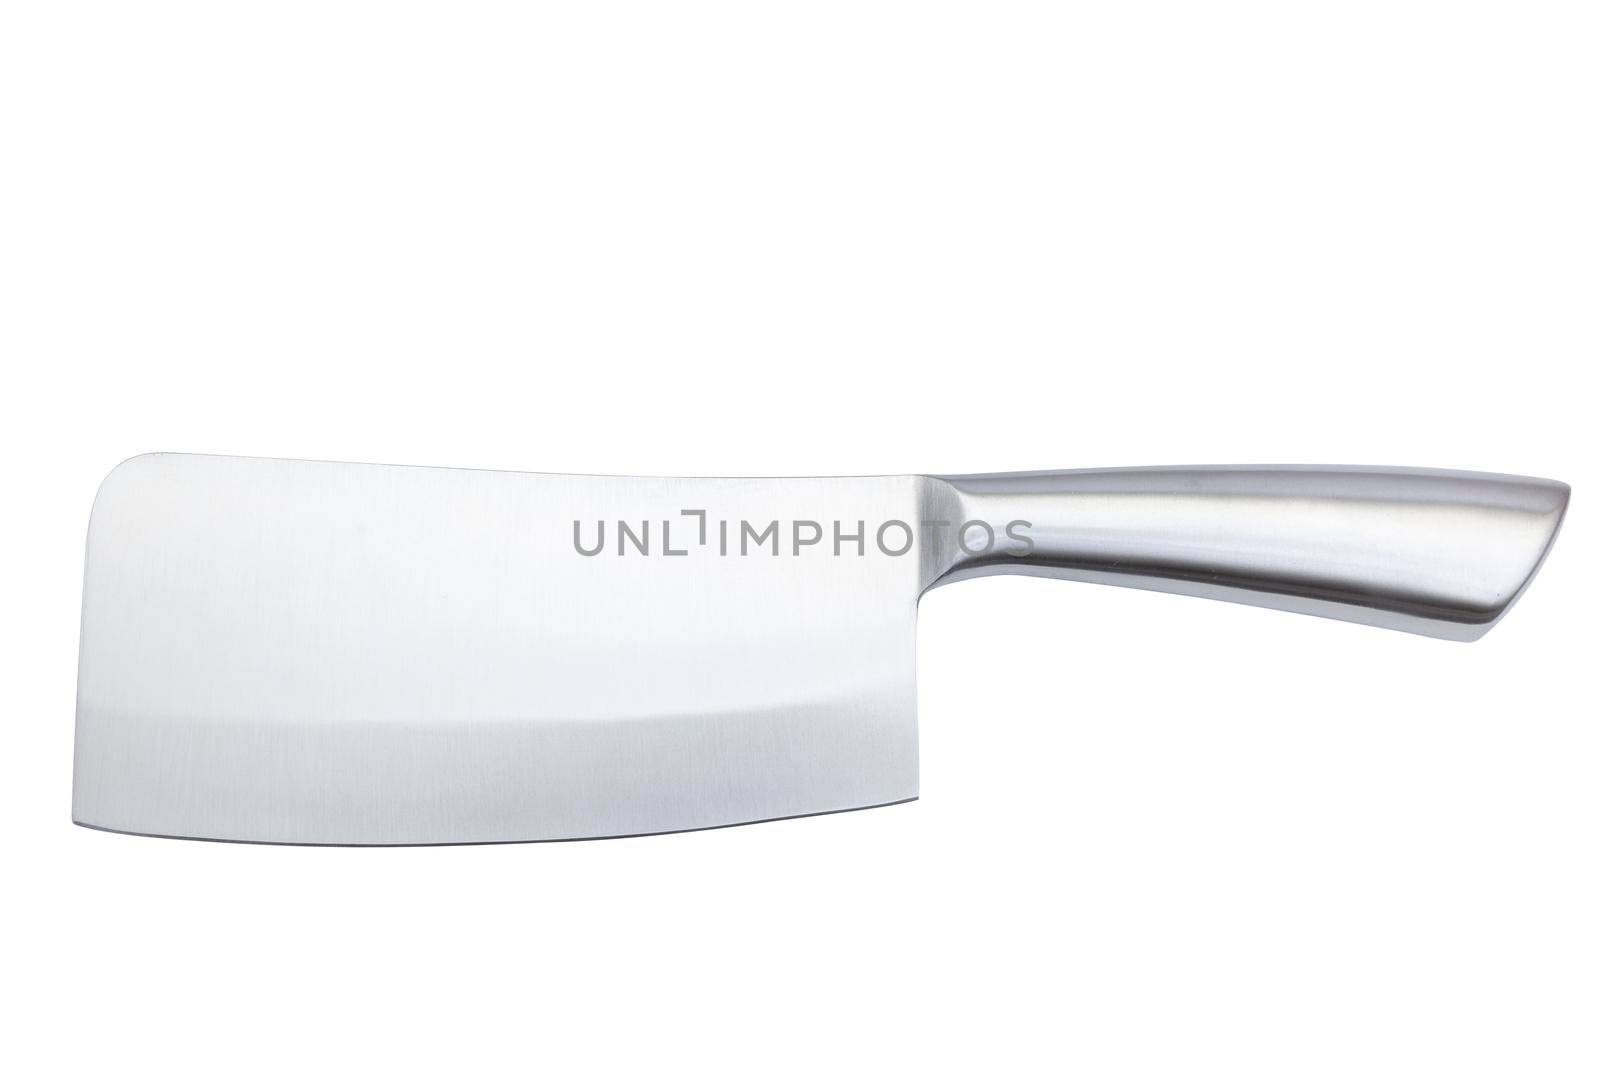 Professional stainless steel meat cleaver - heavy, durable meat chopper knife isolated on white with clipping path